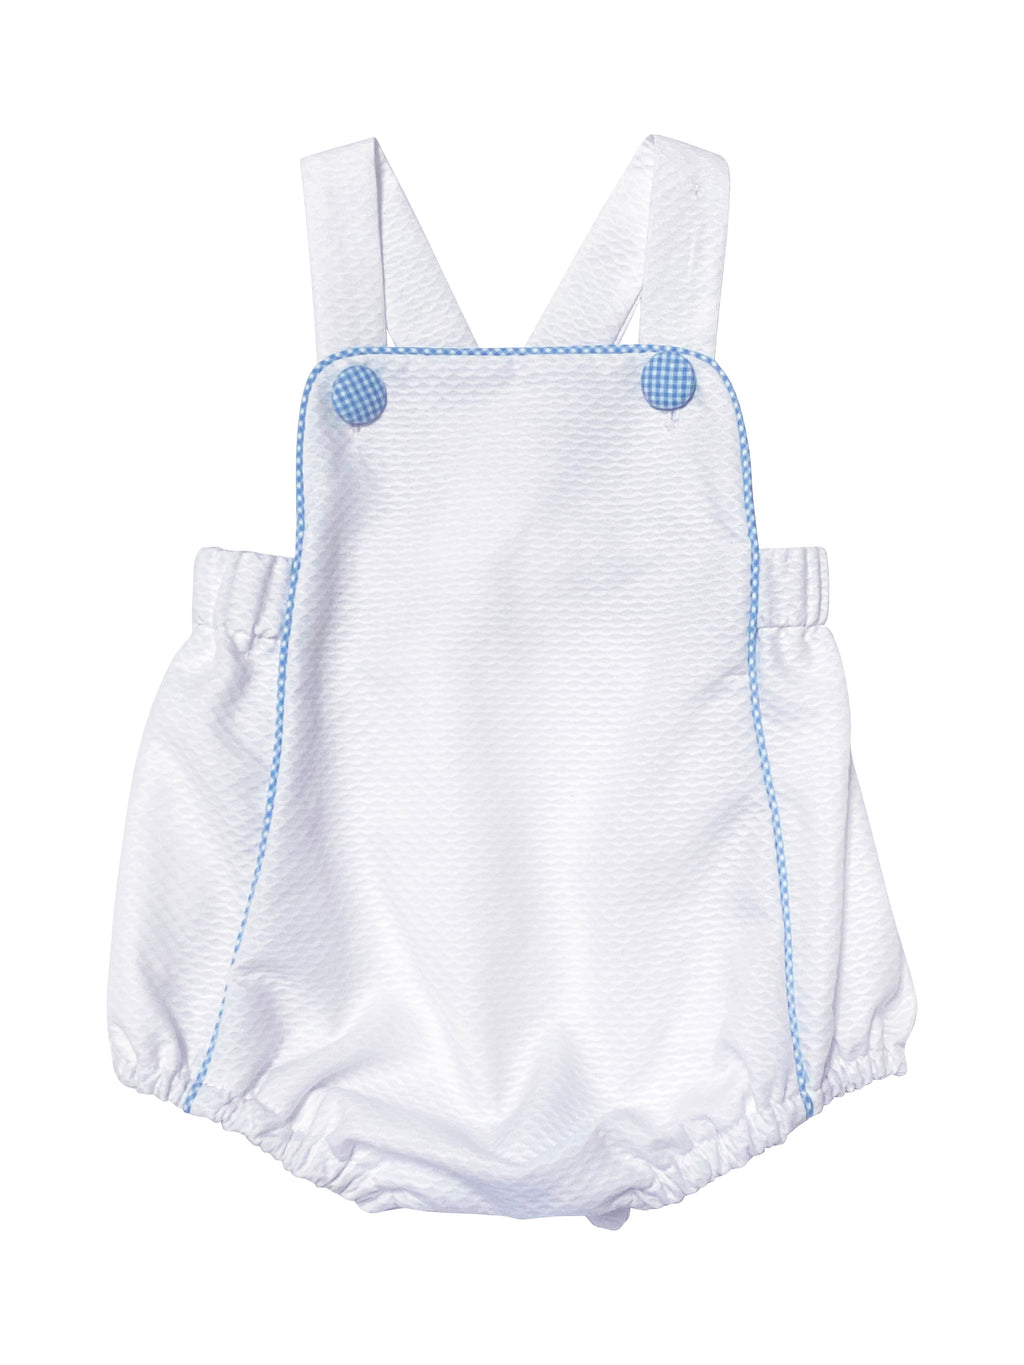 Baby Boy's Blue and White Romper - Little Threads Inc. Children's Clothing